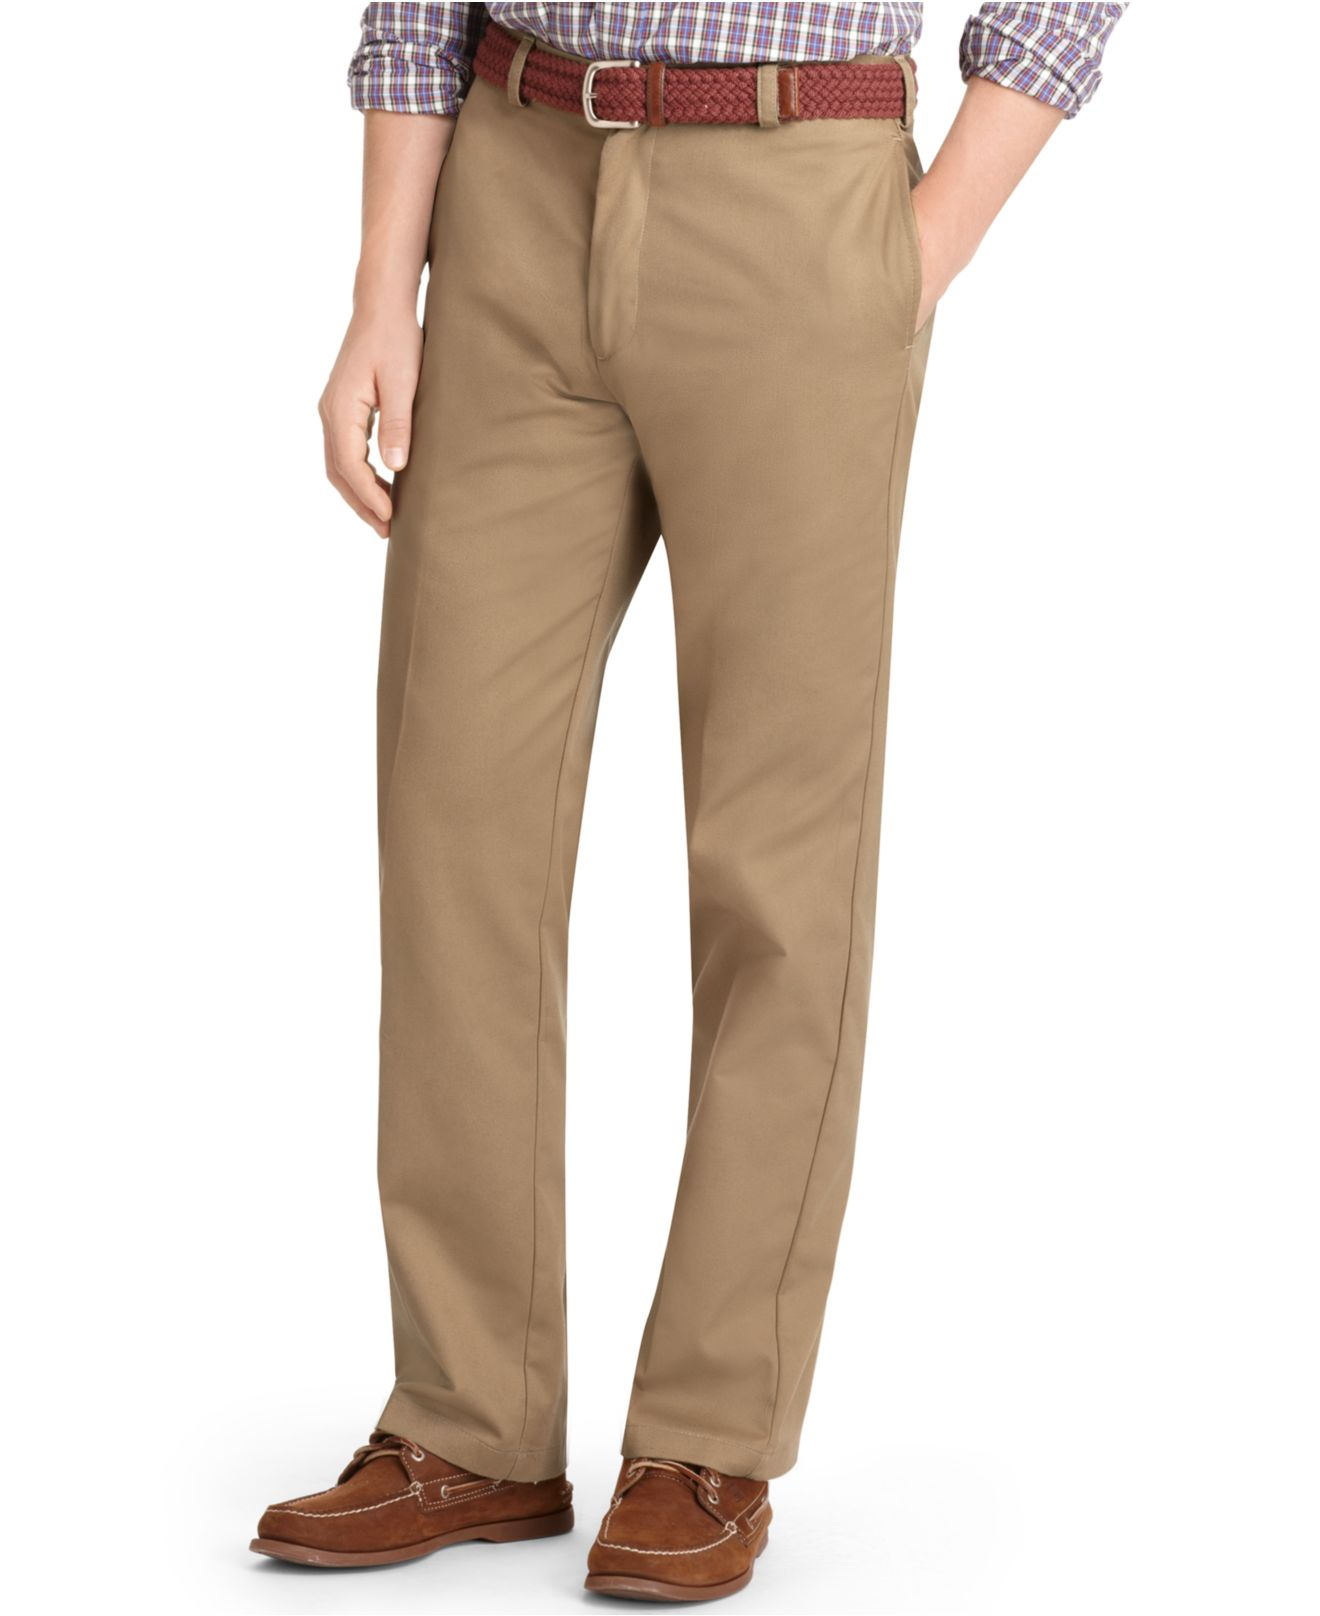 Izod American Classic-fit Wrinkle-free Flat Front Chino Pants in ...